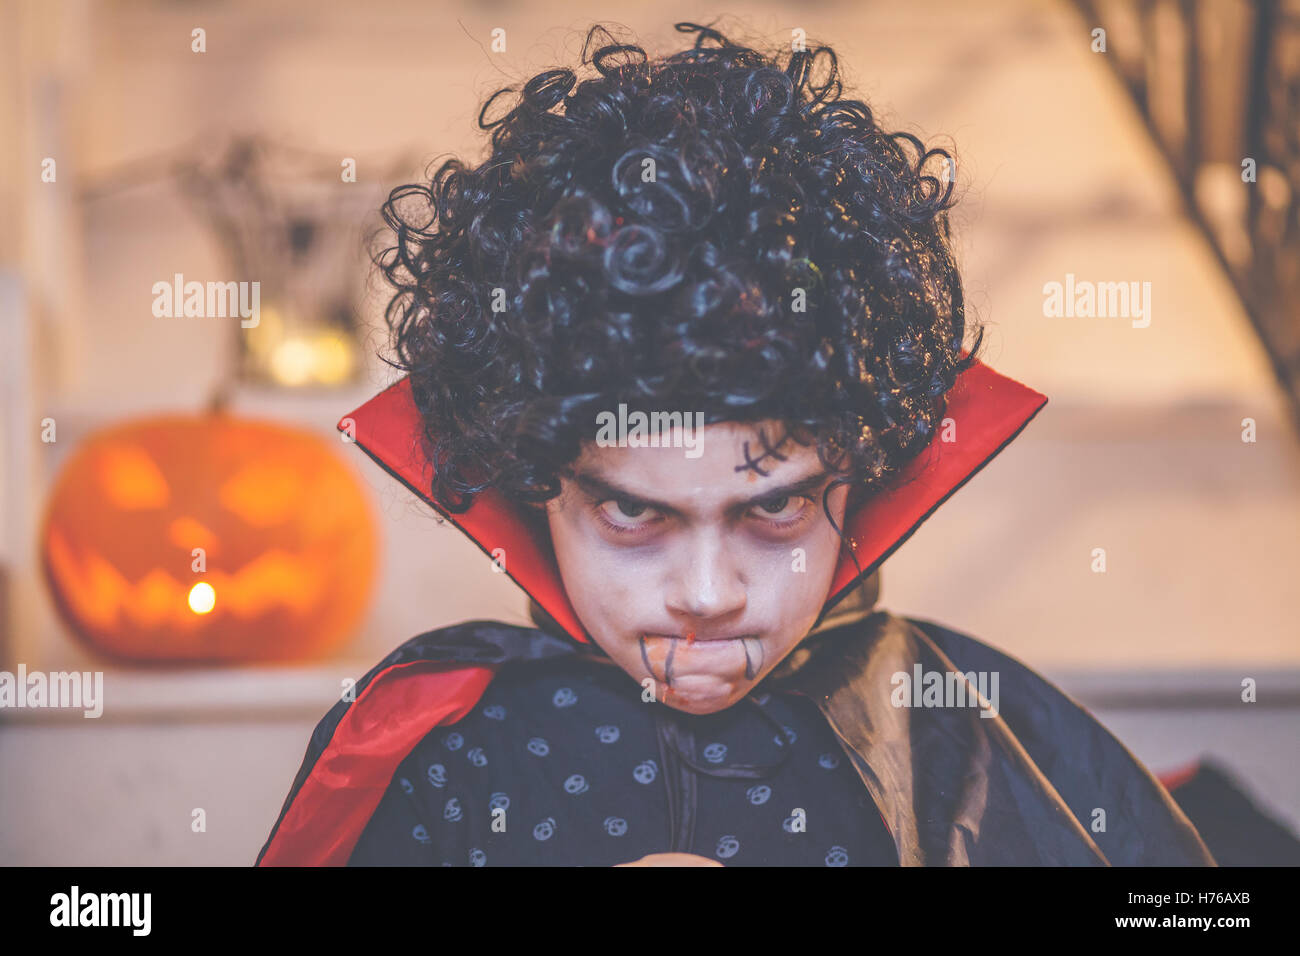 Boy wearing costume halloween dracula Banque D'Images